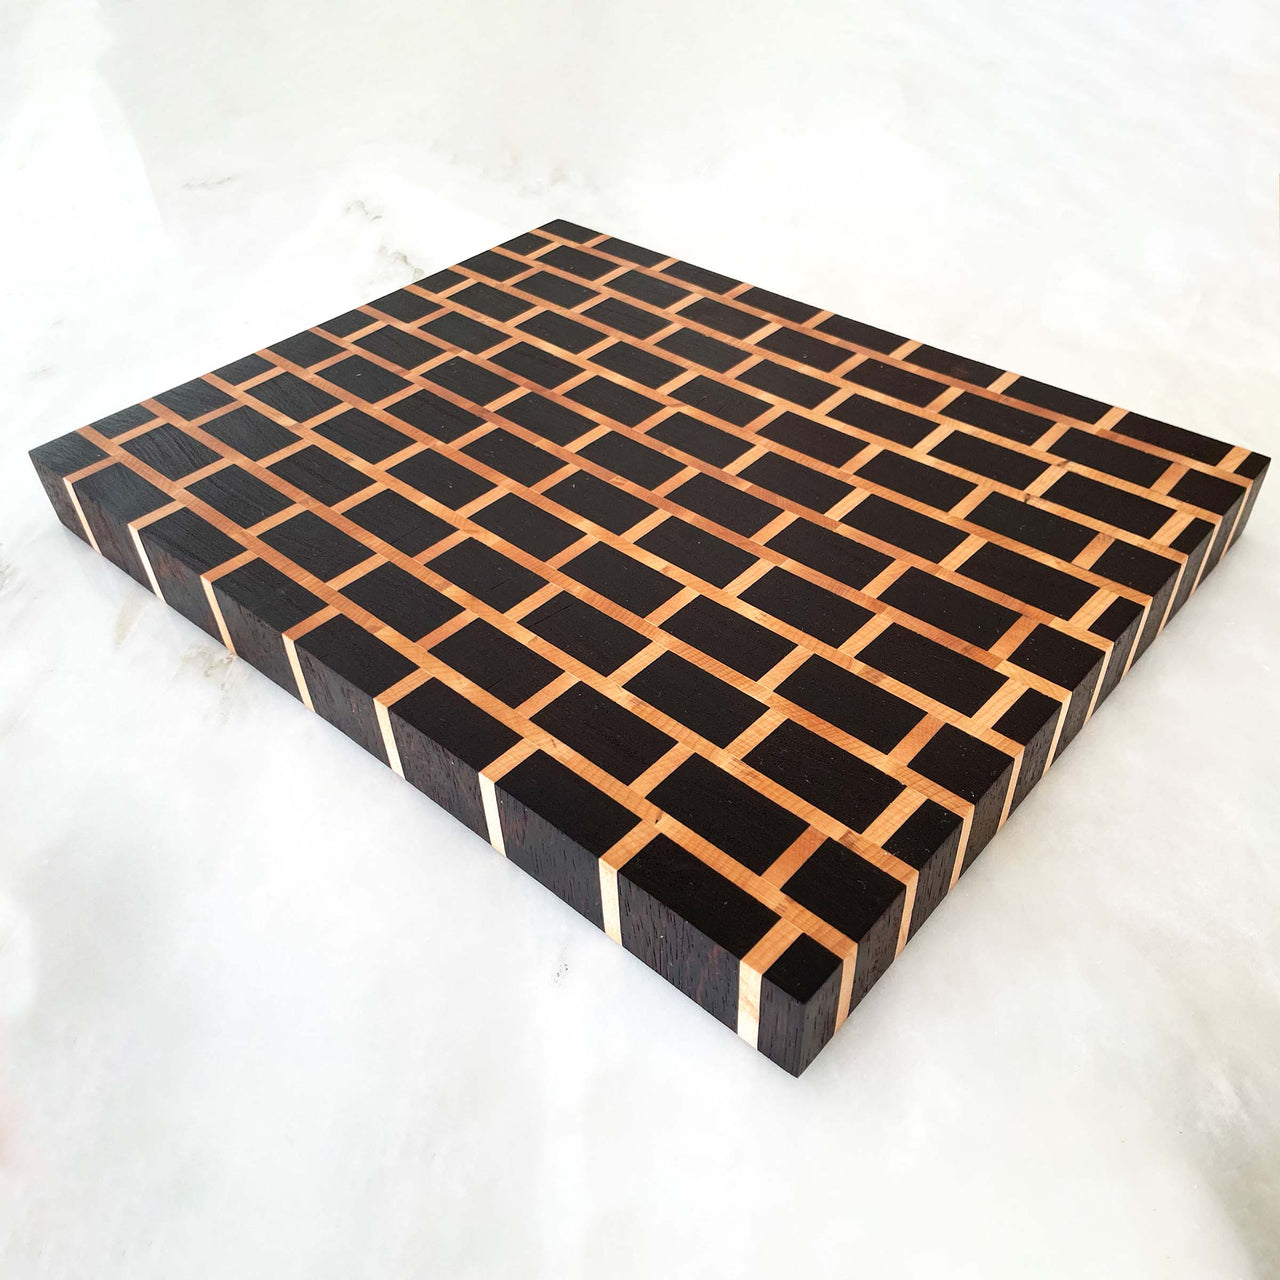 In Stock- Wenge Wood + Maple End Grain Cutting Board "The Gormley"